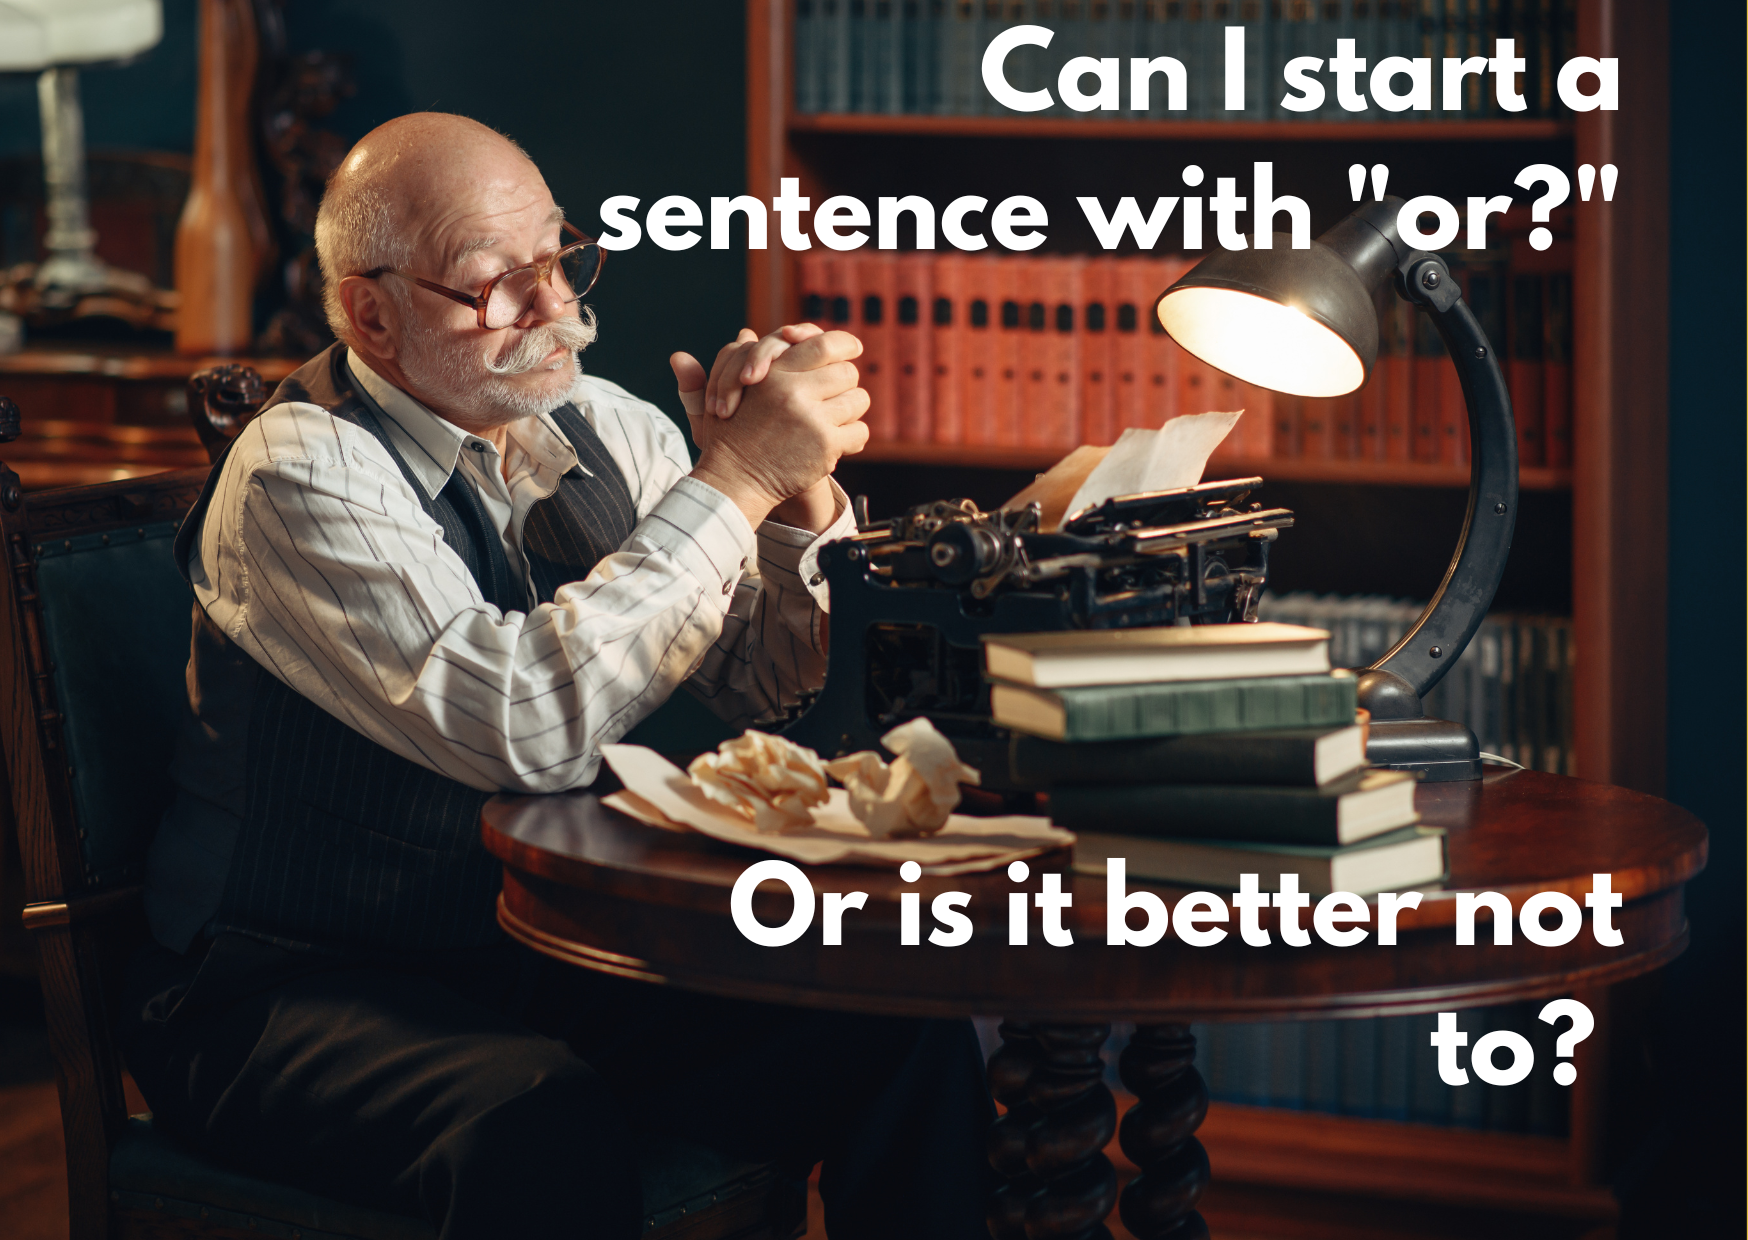 A man sitting in front of a typewriter, pondering, with a caption: "can I start a sentence with "or?" Or is it better not to?